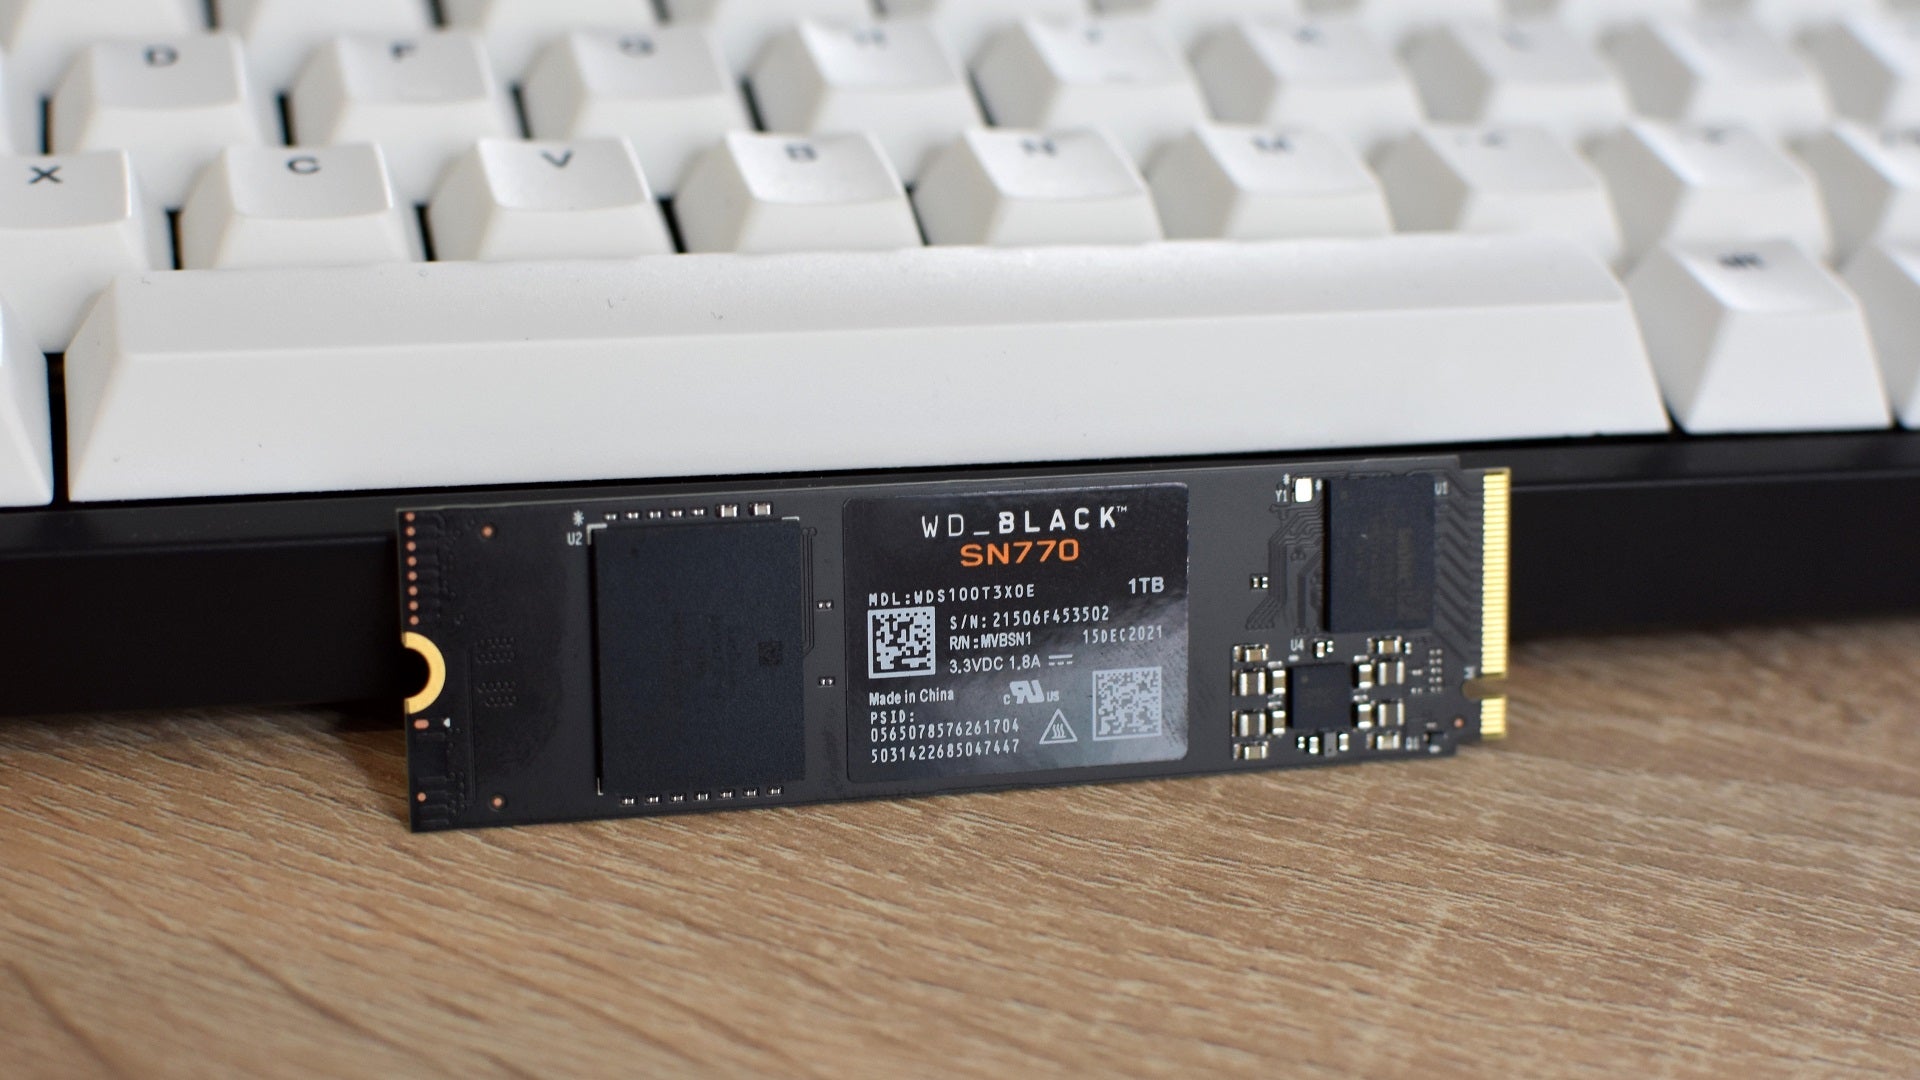 The WD Black SN770 SSD propped up against a gaming keyboard.